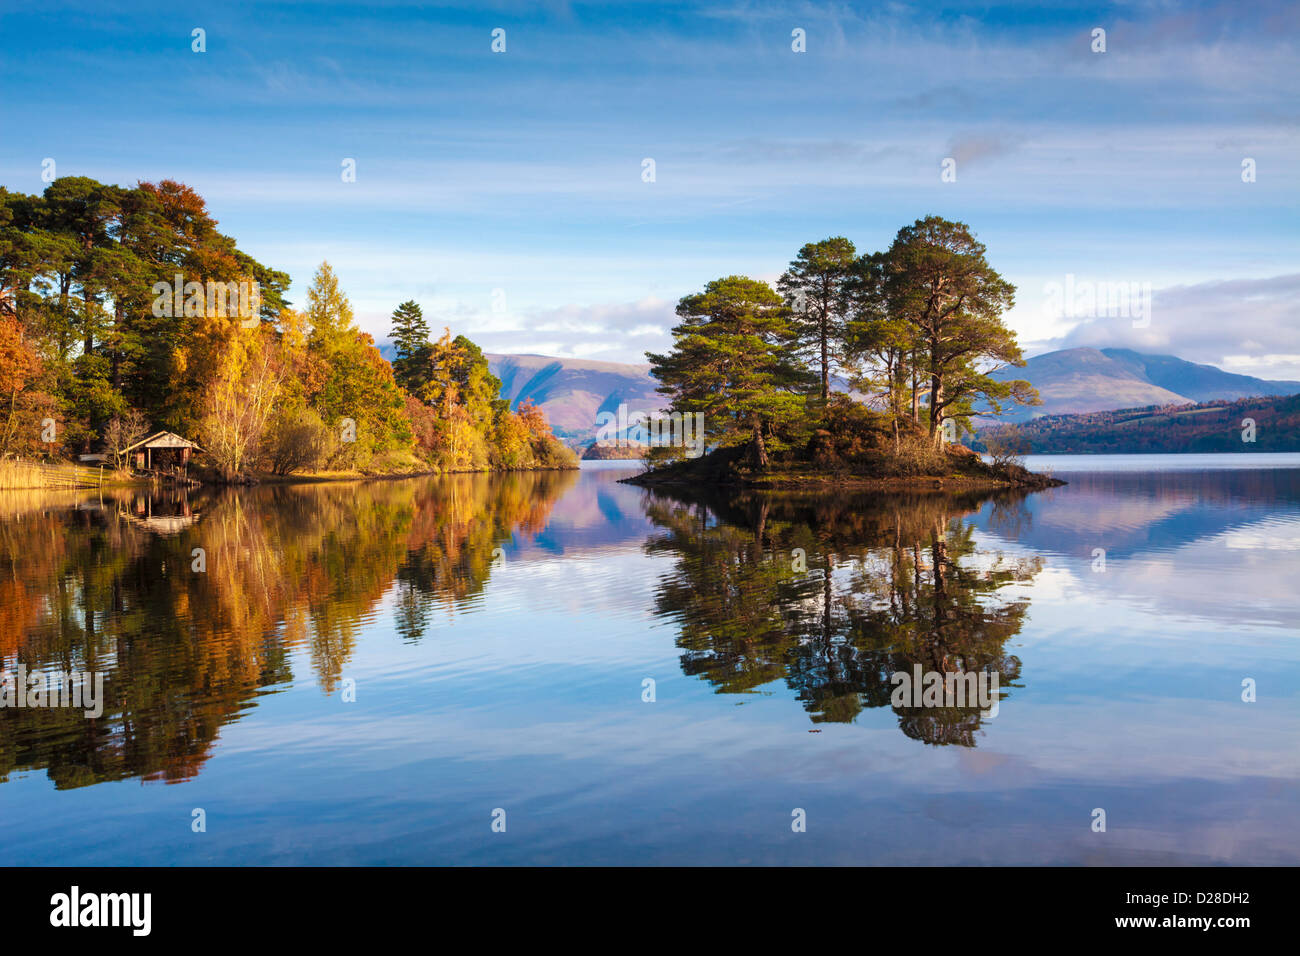 Abbot's Bay near the southern end of Derwent water in the Lake District National Park.   Captured on a still morning in October. Stock Photo